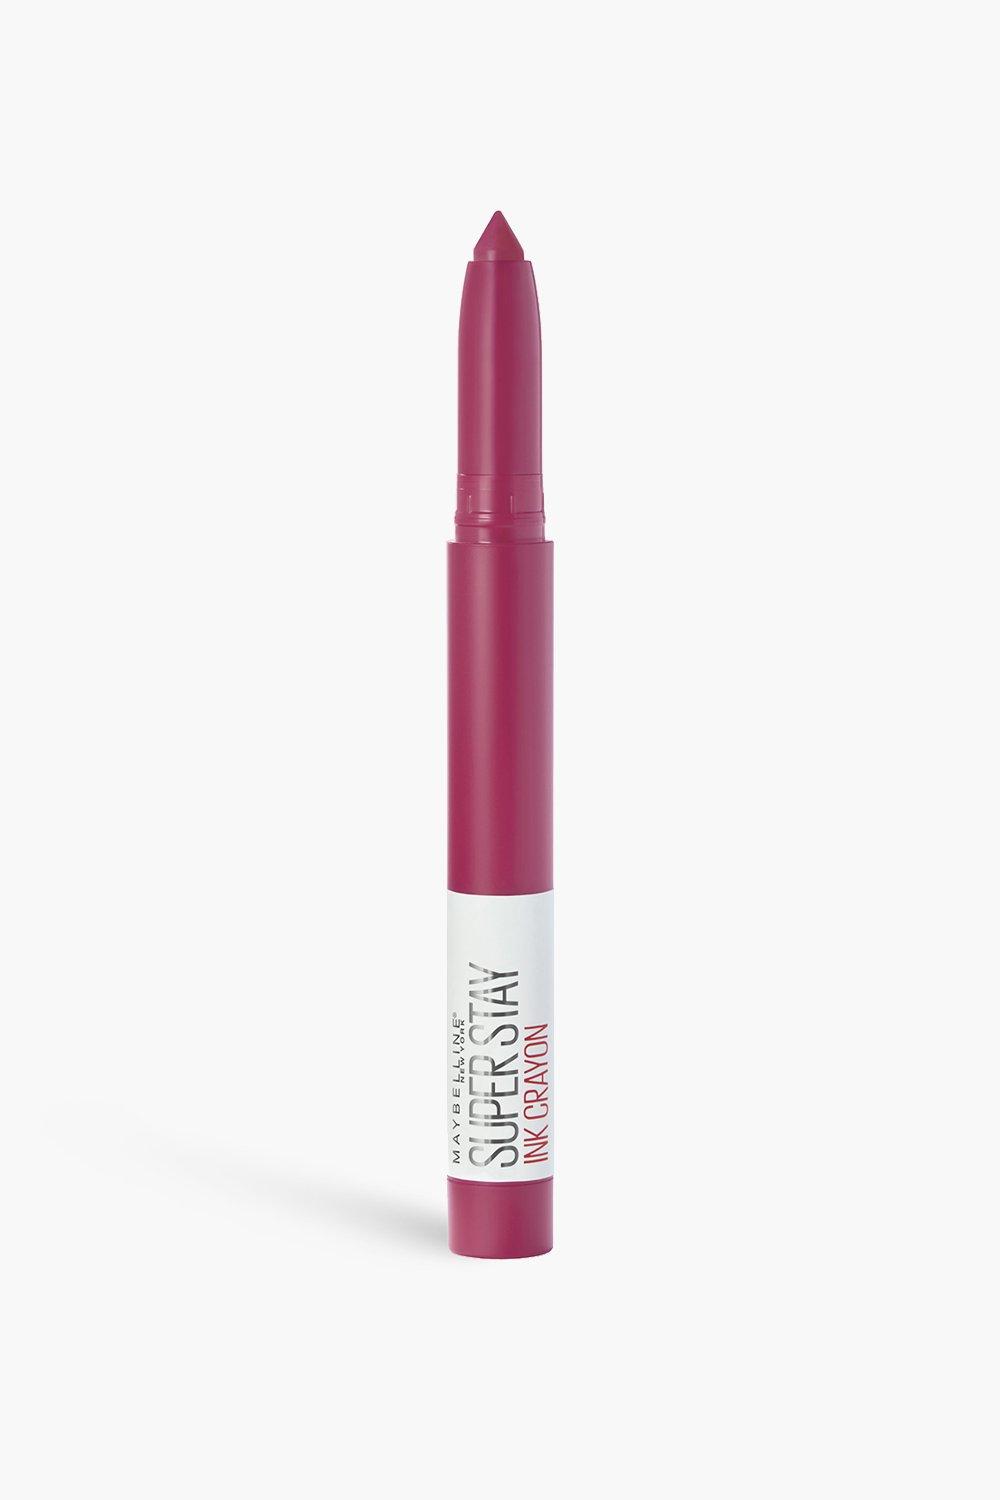 Maybelline Superstay Matte Crayon Lipstick, 35 Treat Yourself